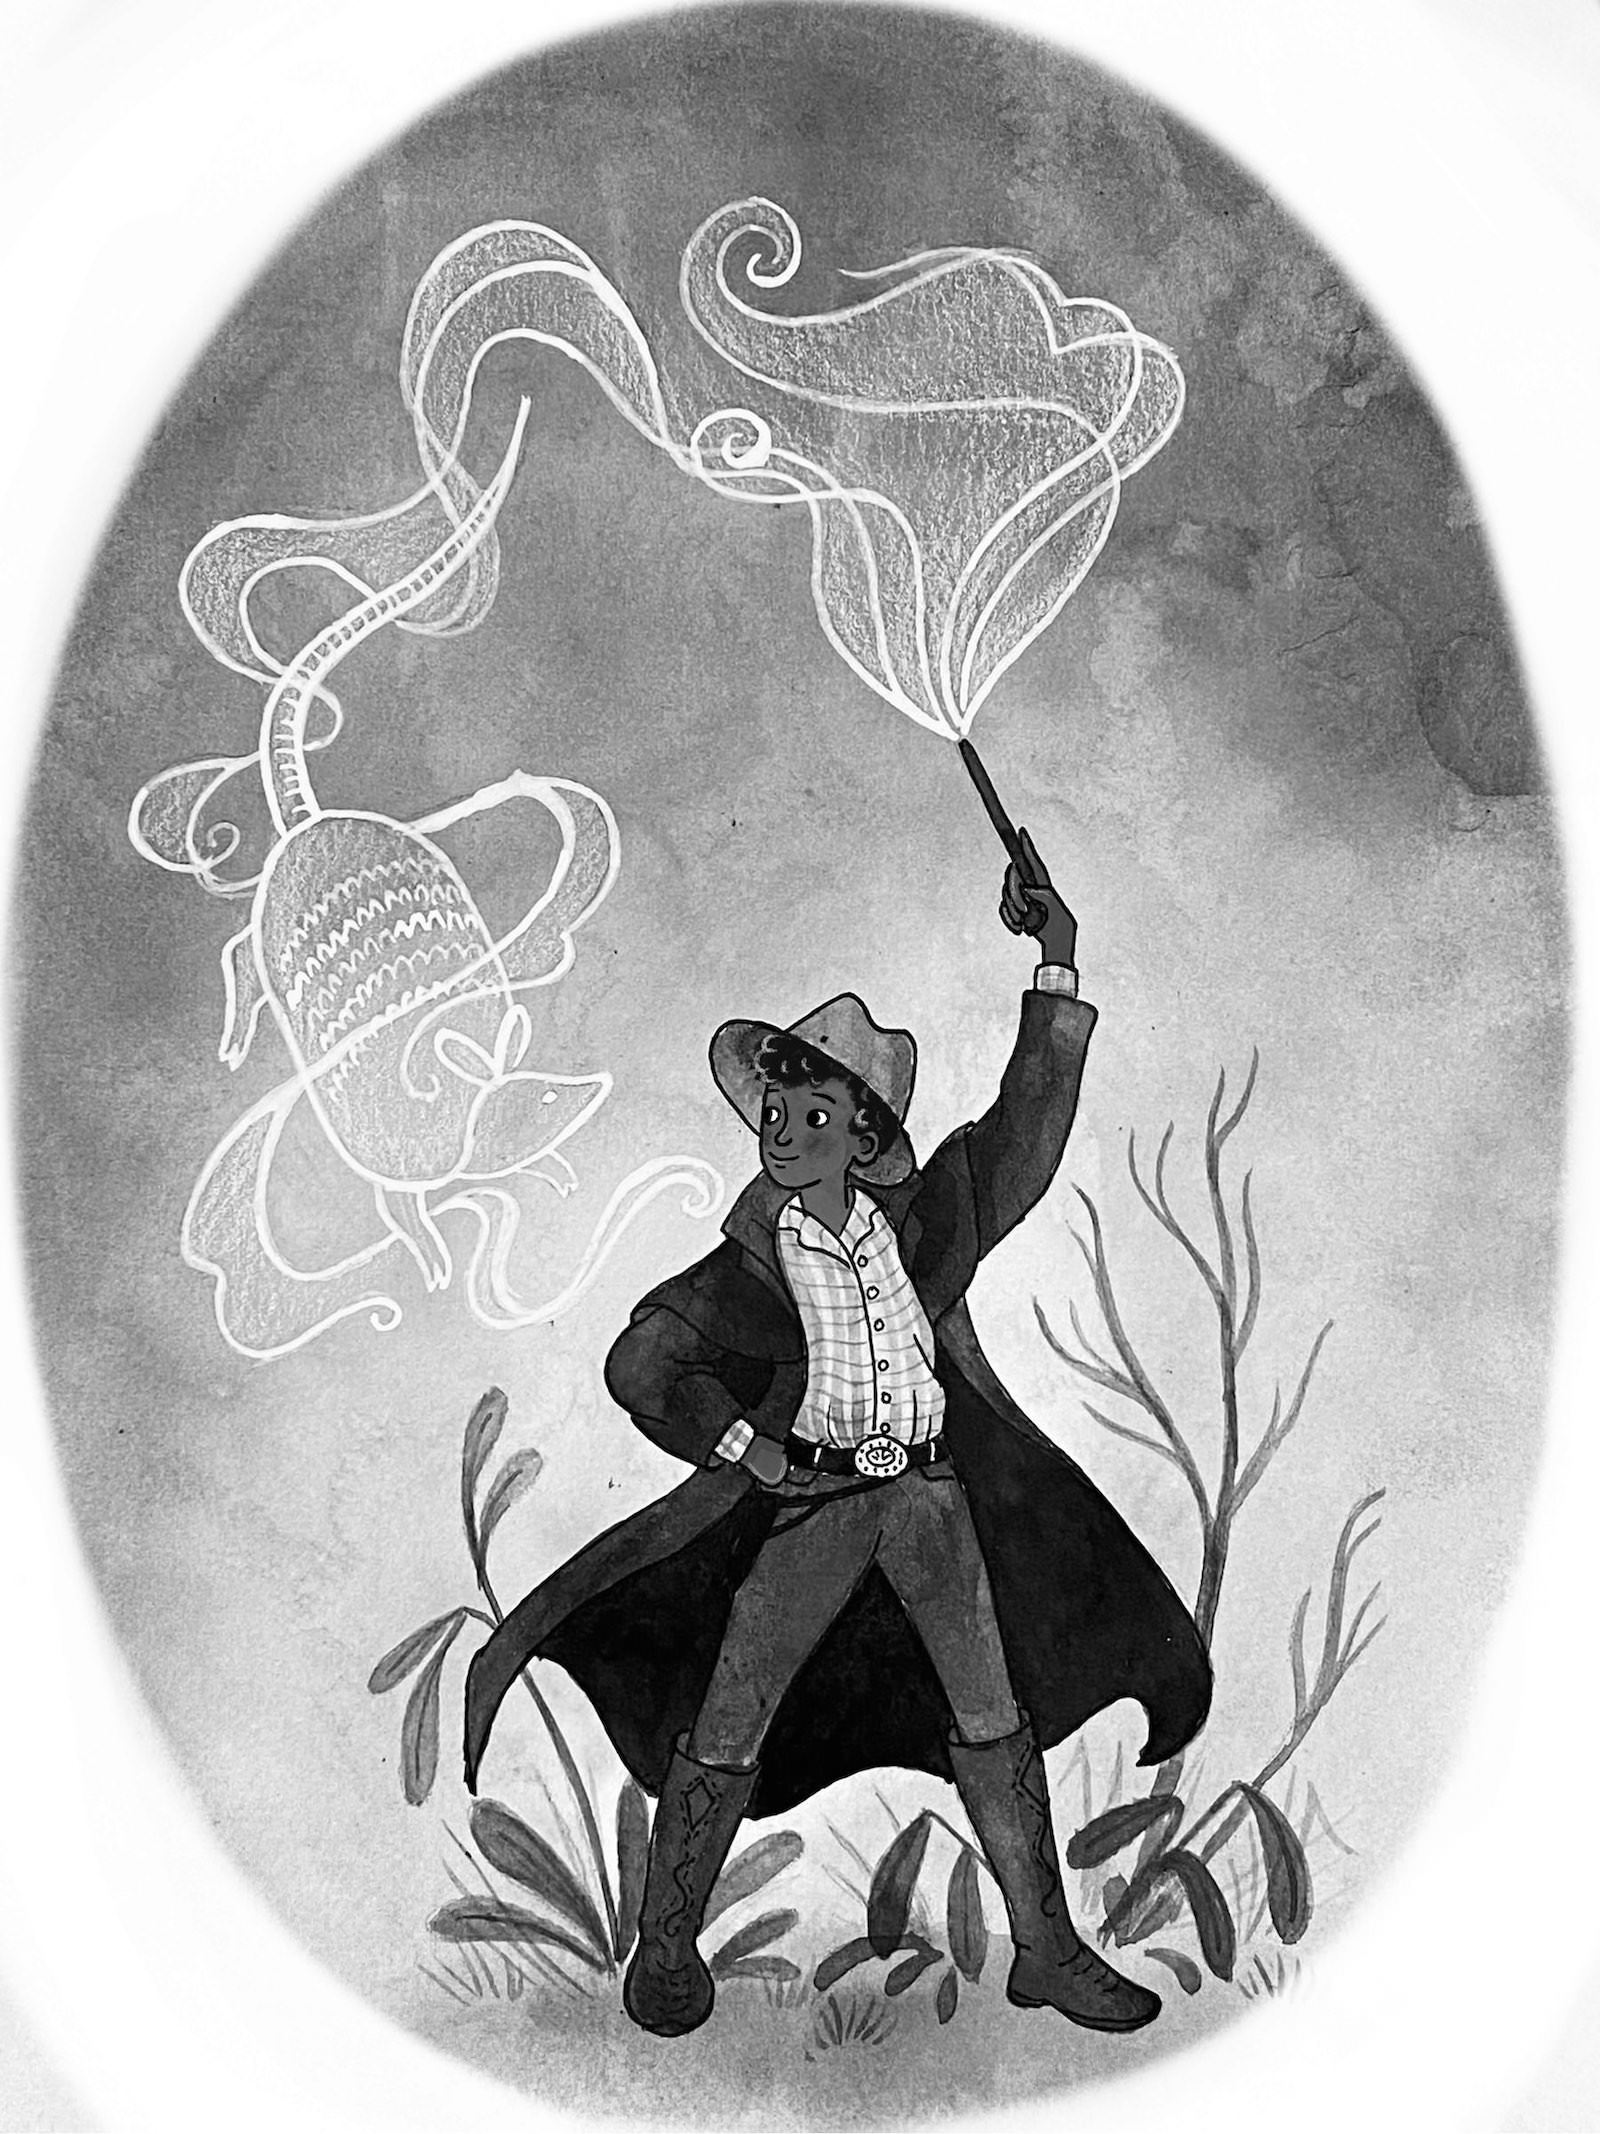 Black and white children's book illustration of a black wizard, dressed as a cowboy with a trench coat and hat, brandishing his wand like a pistol and producing an armadillo patronus.